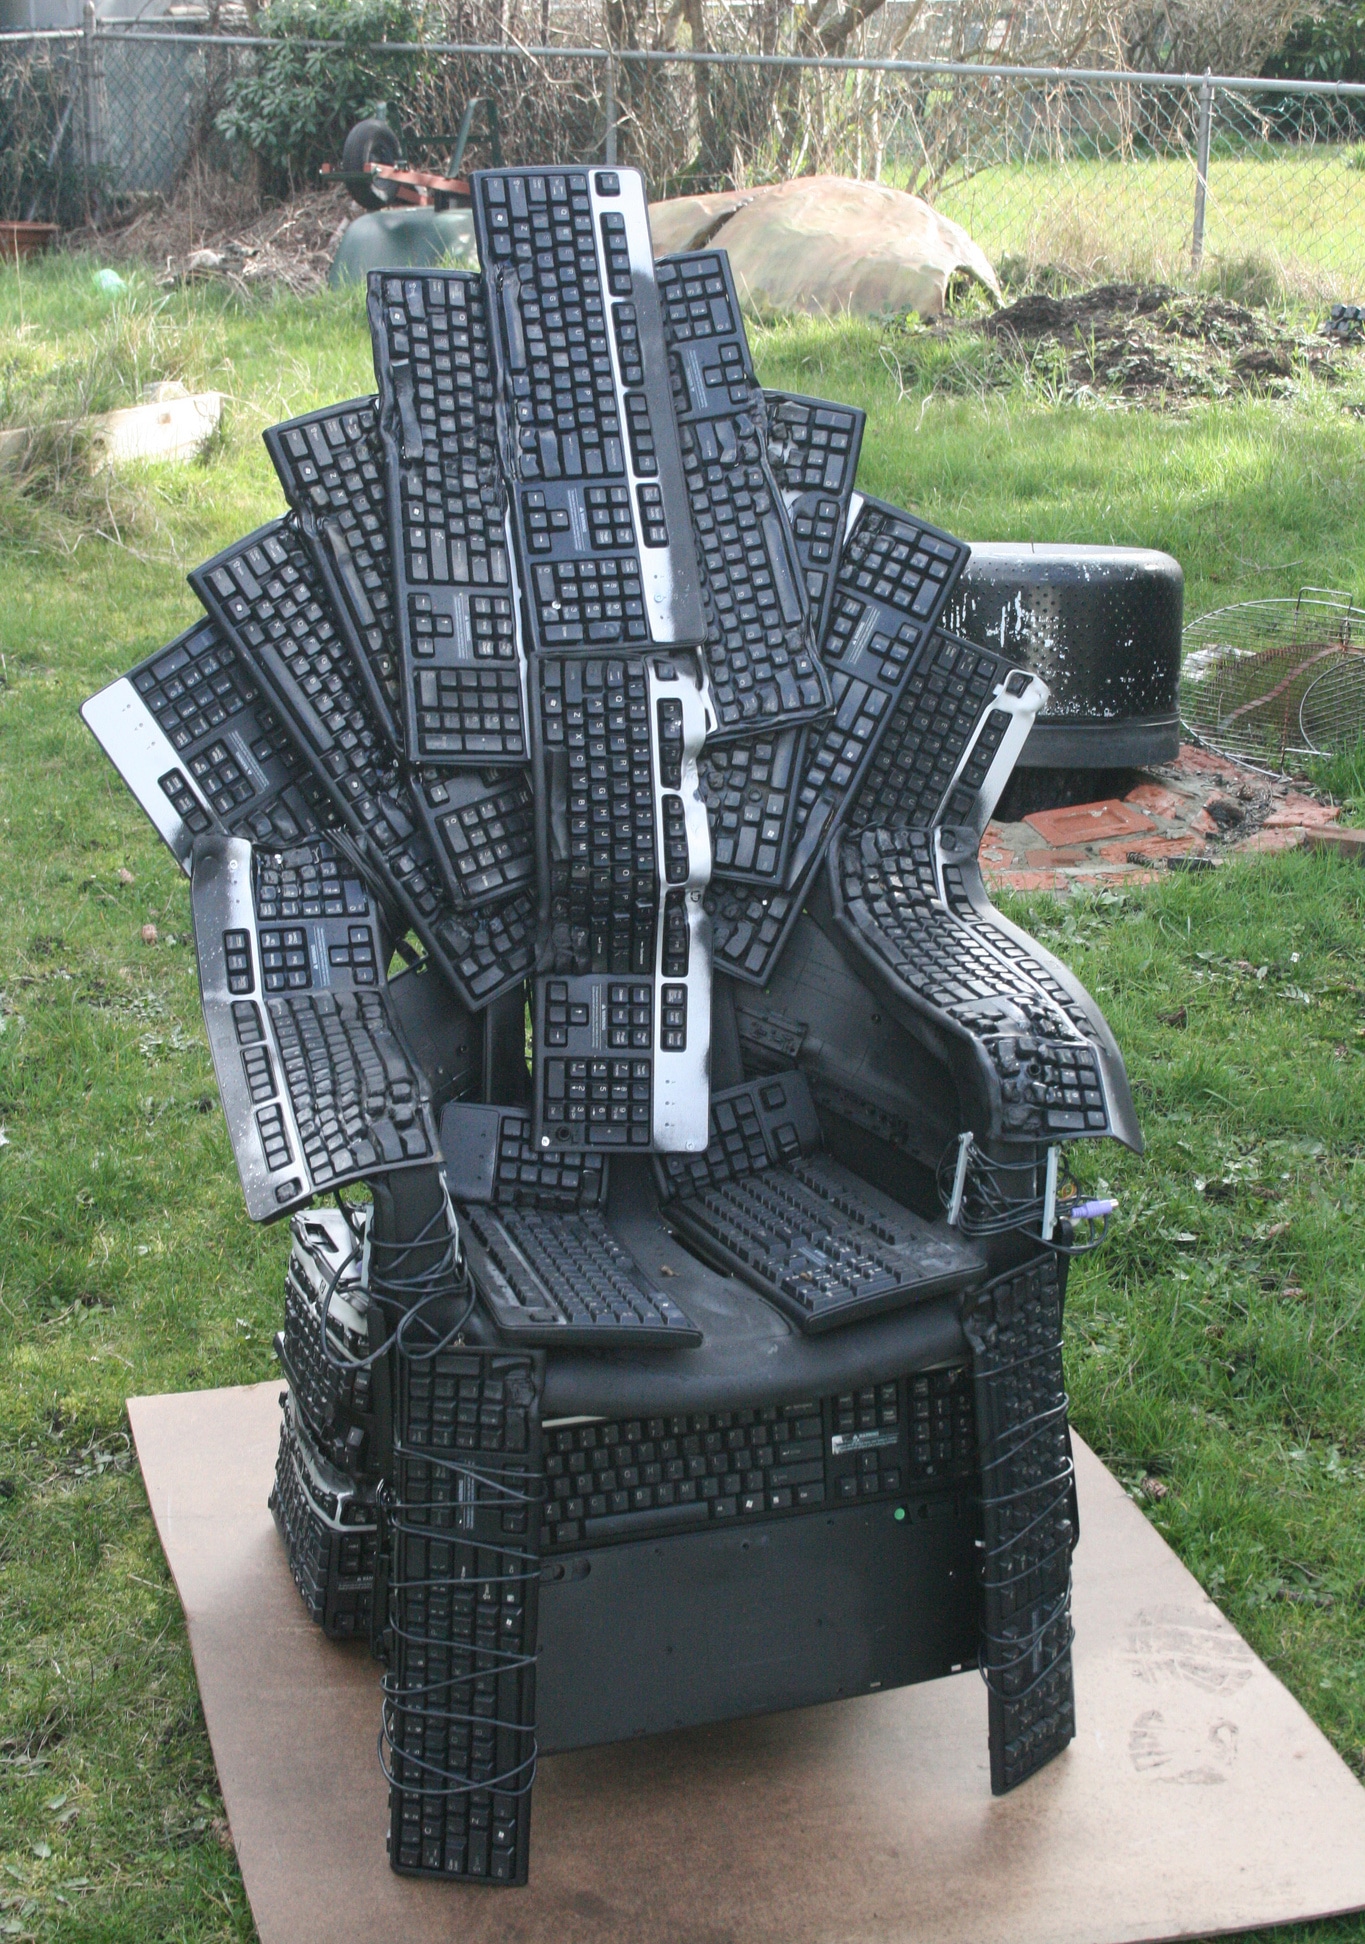 Throne Of Nerds: Game Of Thrones Tribute Made From Computer Keyboards